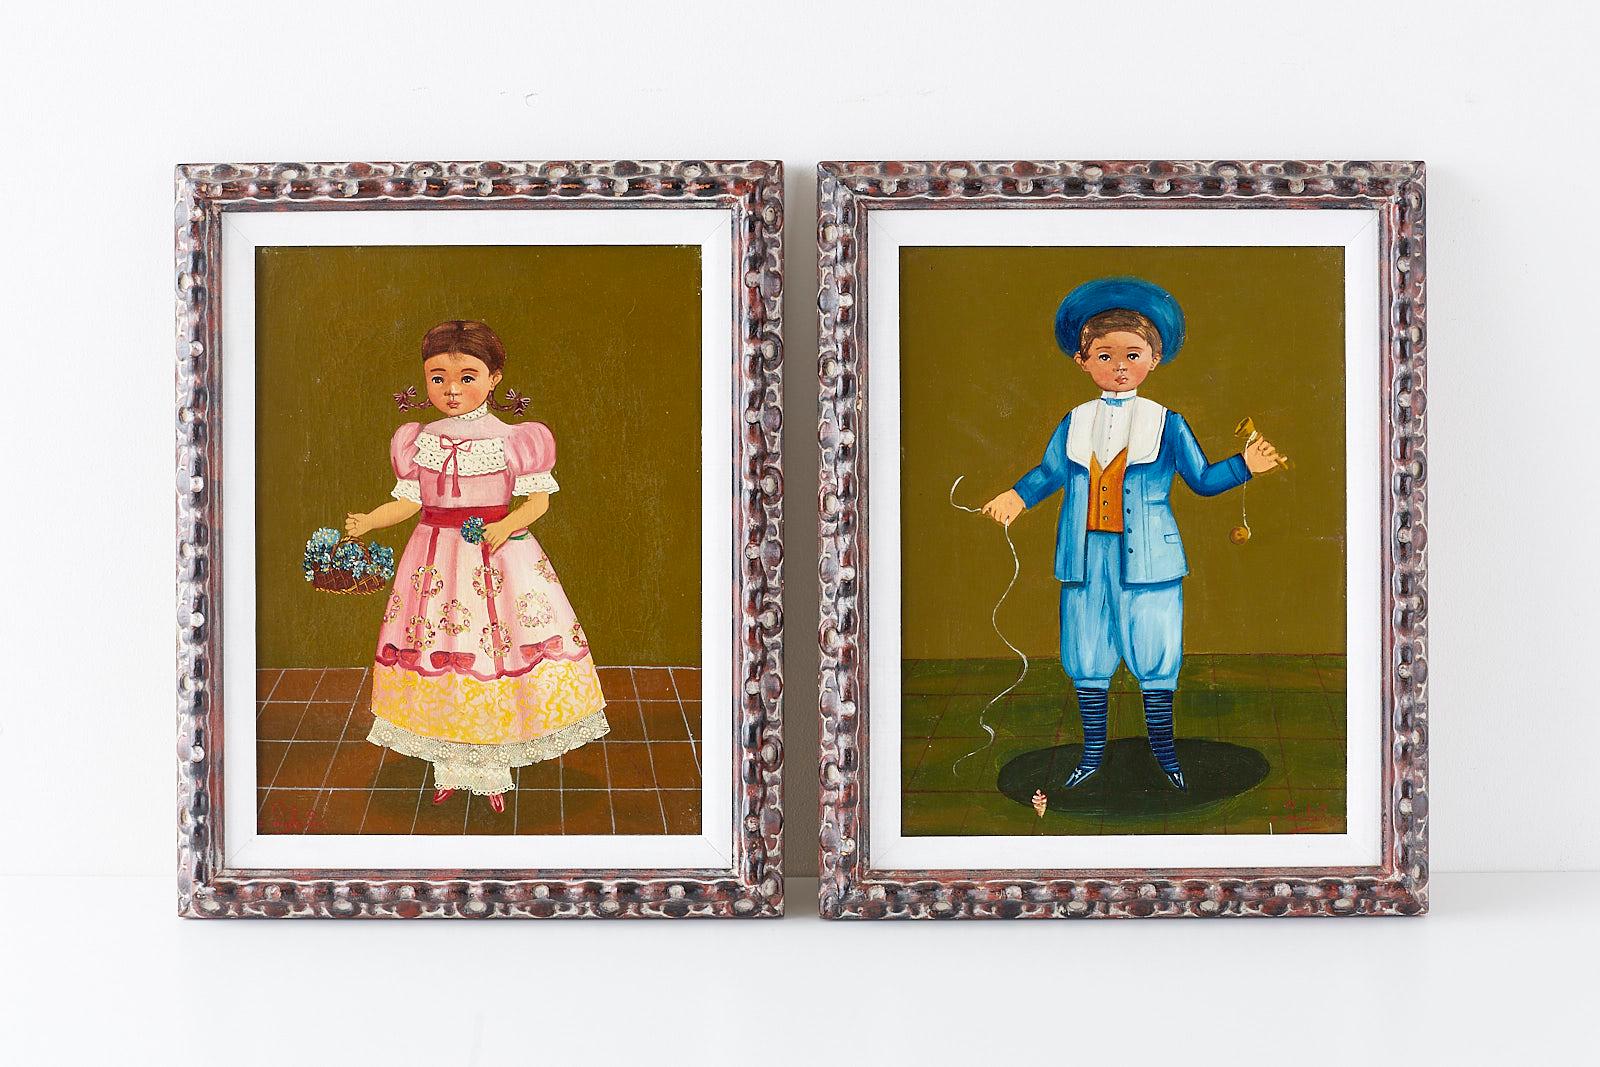 Agapito Labios Figurative Painting - Boy and Girl Mexican Folk Art Paintings